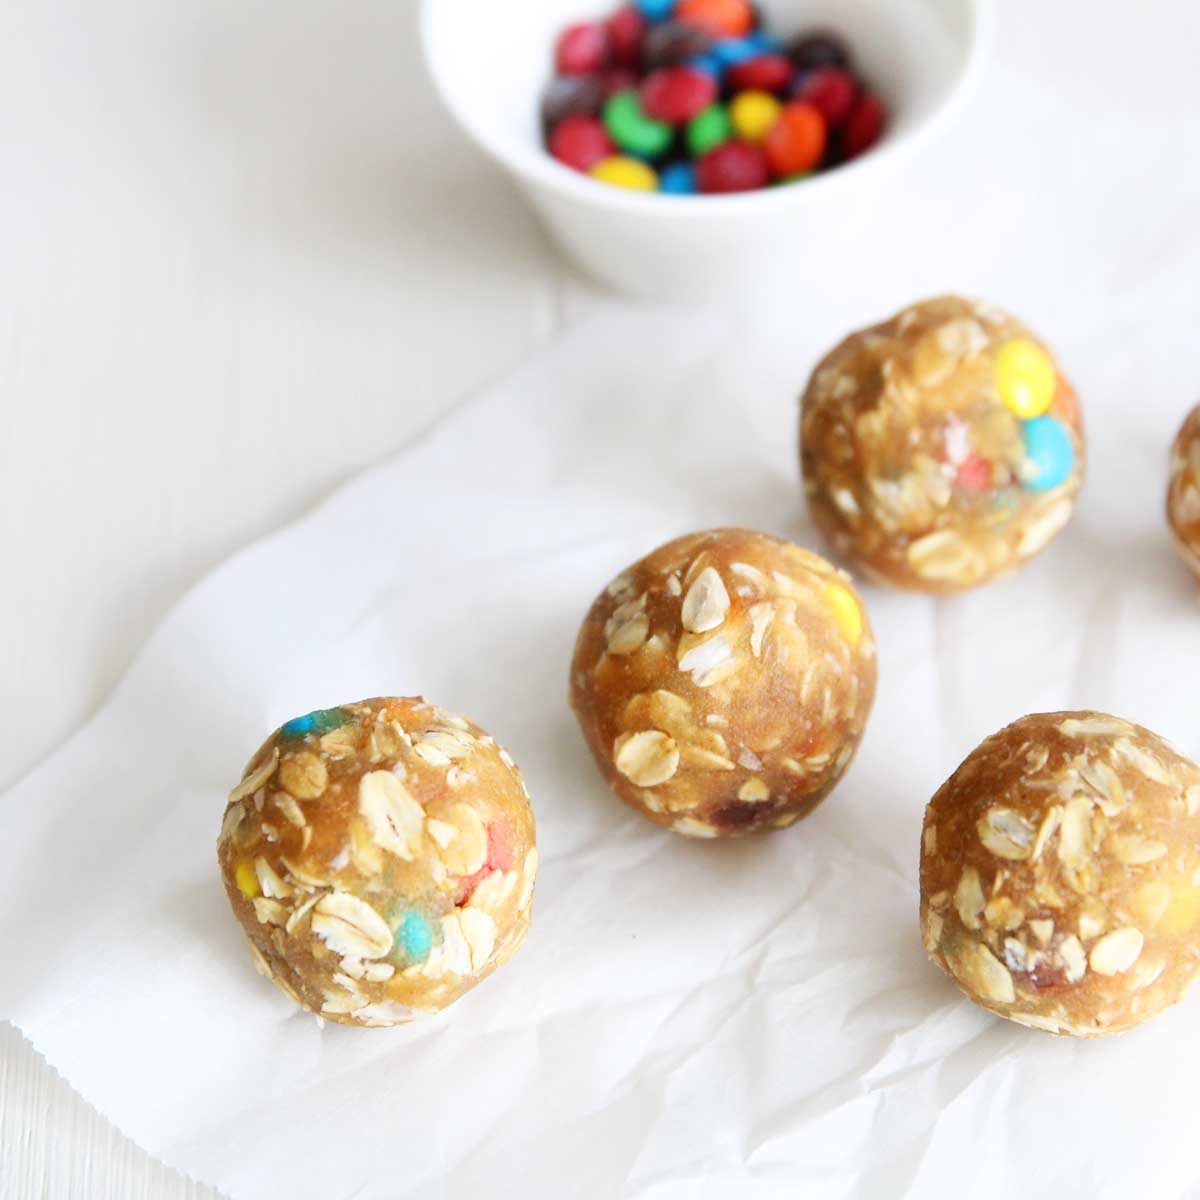 Healthy Monster Cookie Protein Balls Made with Collagen Peptides - Pistachio Nice Cream